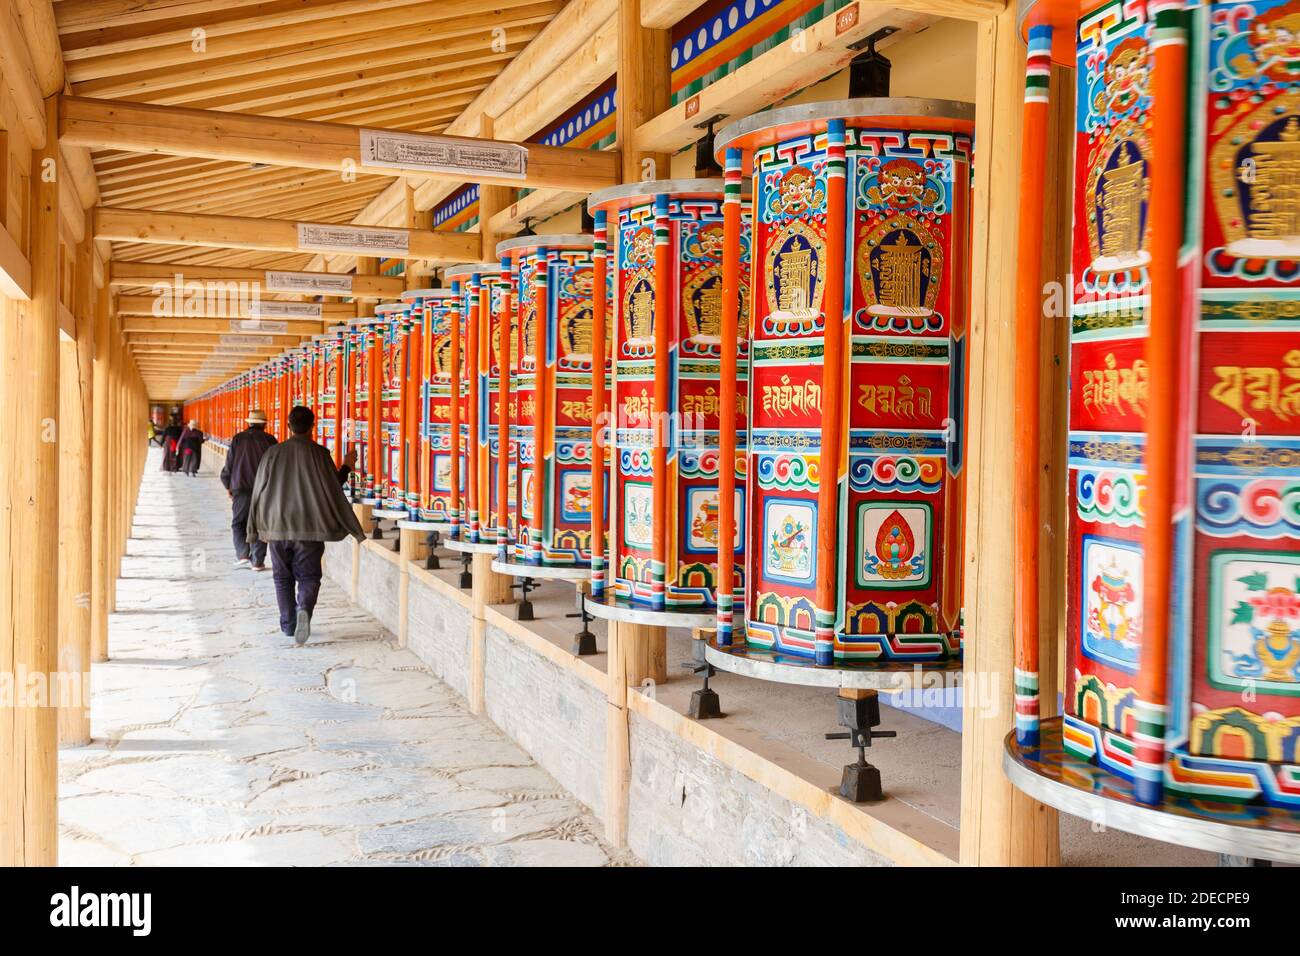 Xiahe, Gansu Province / China - April 28, 2017: Wooden prayer wheels at Labrang Monastery. With pilgrims walking by and spinning the wheels. Stock Photo